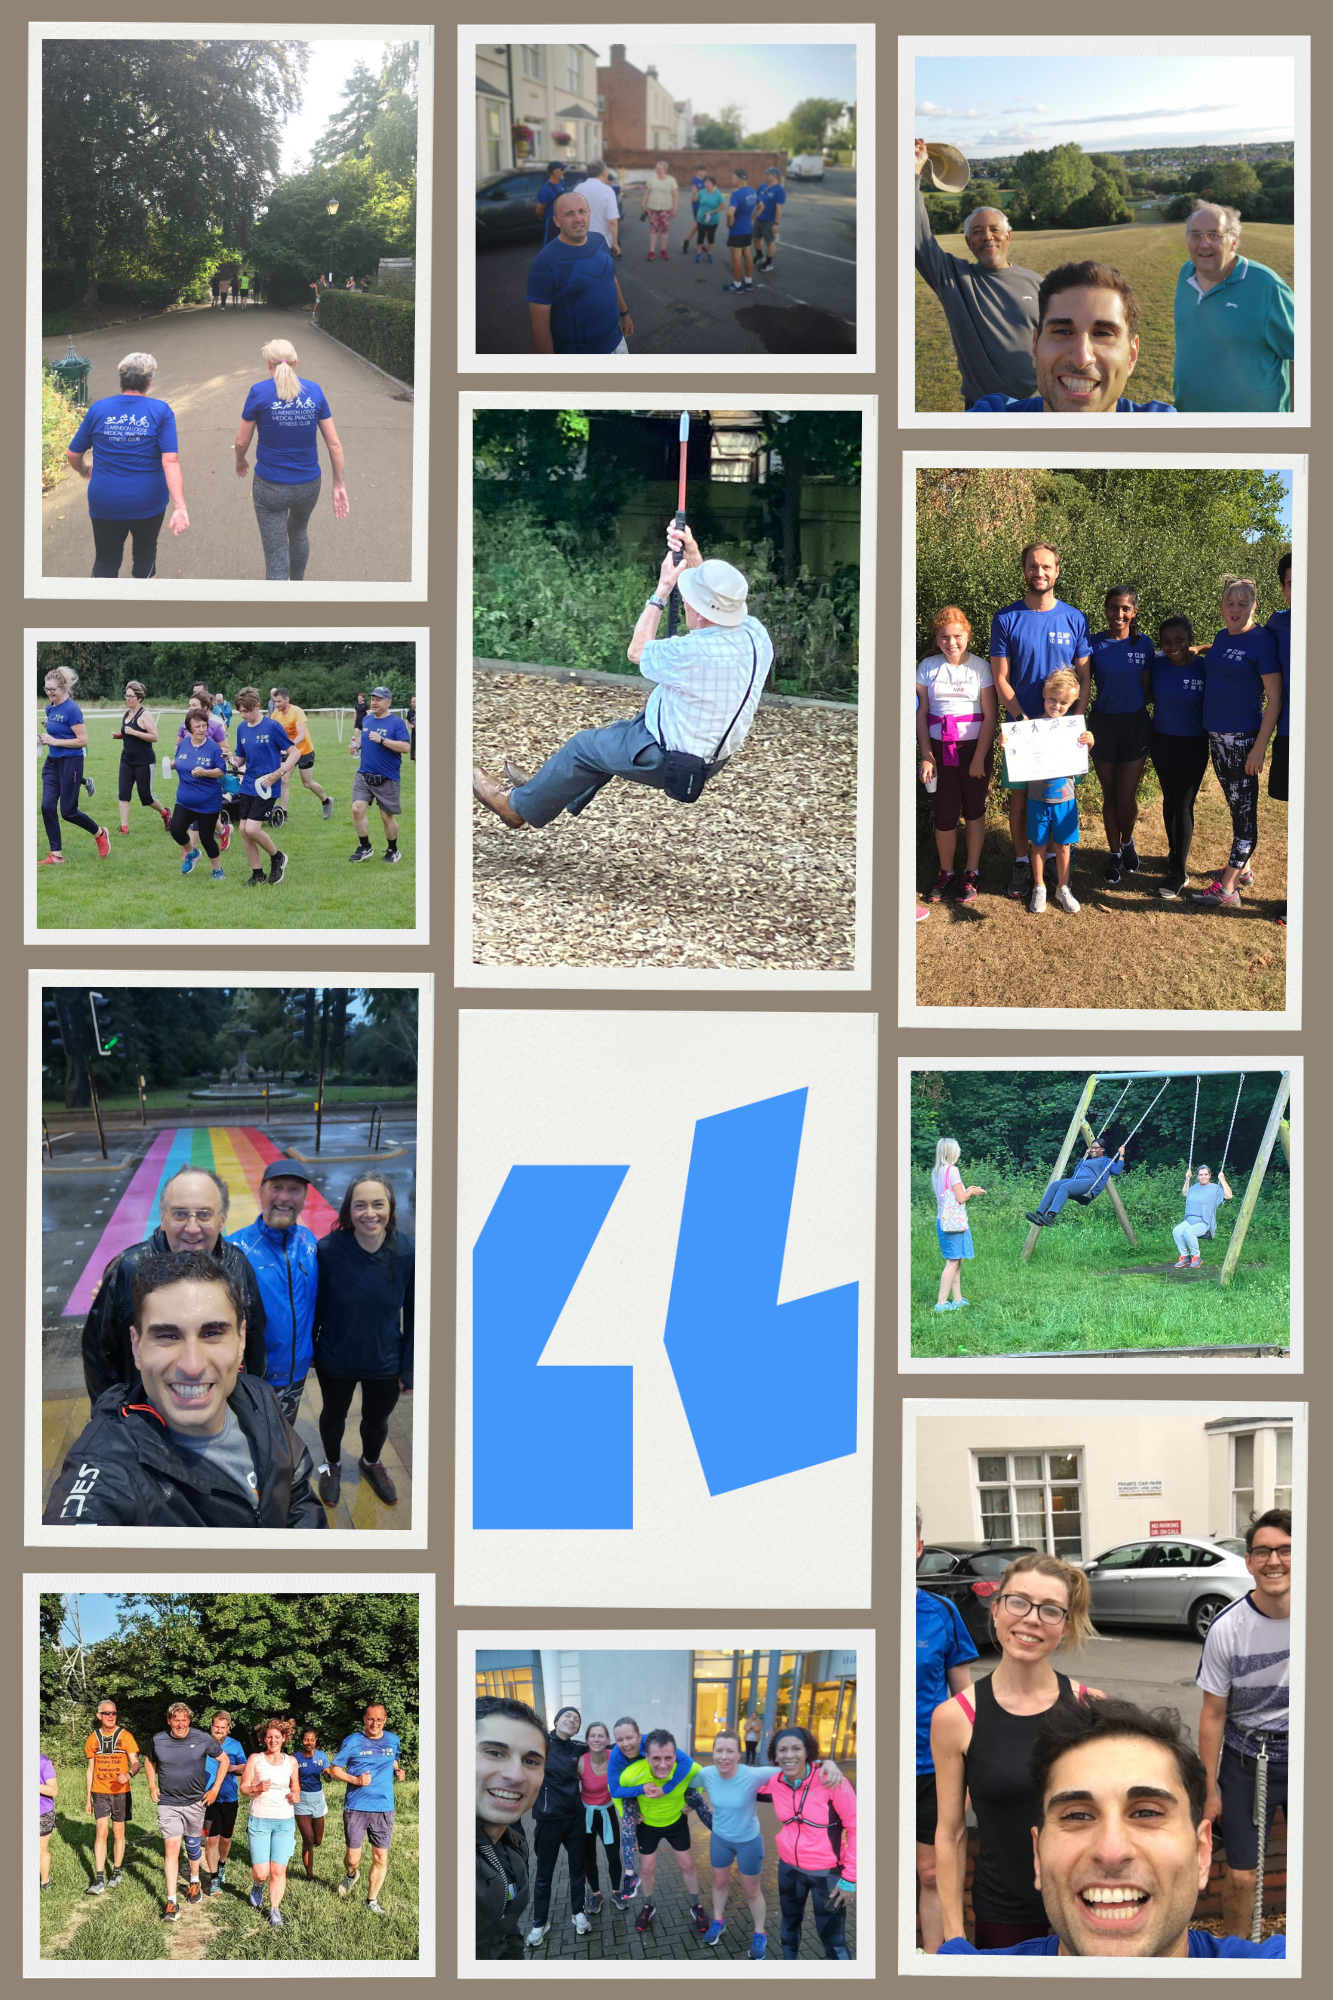 Collage of images of groups of people taking part in physical activities